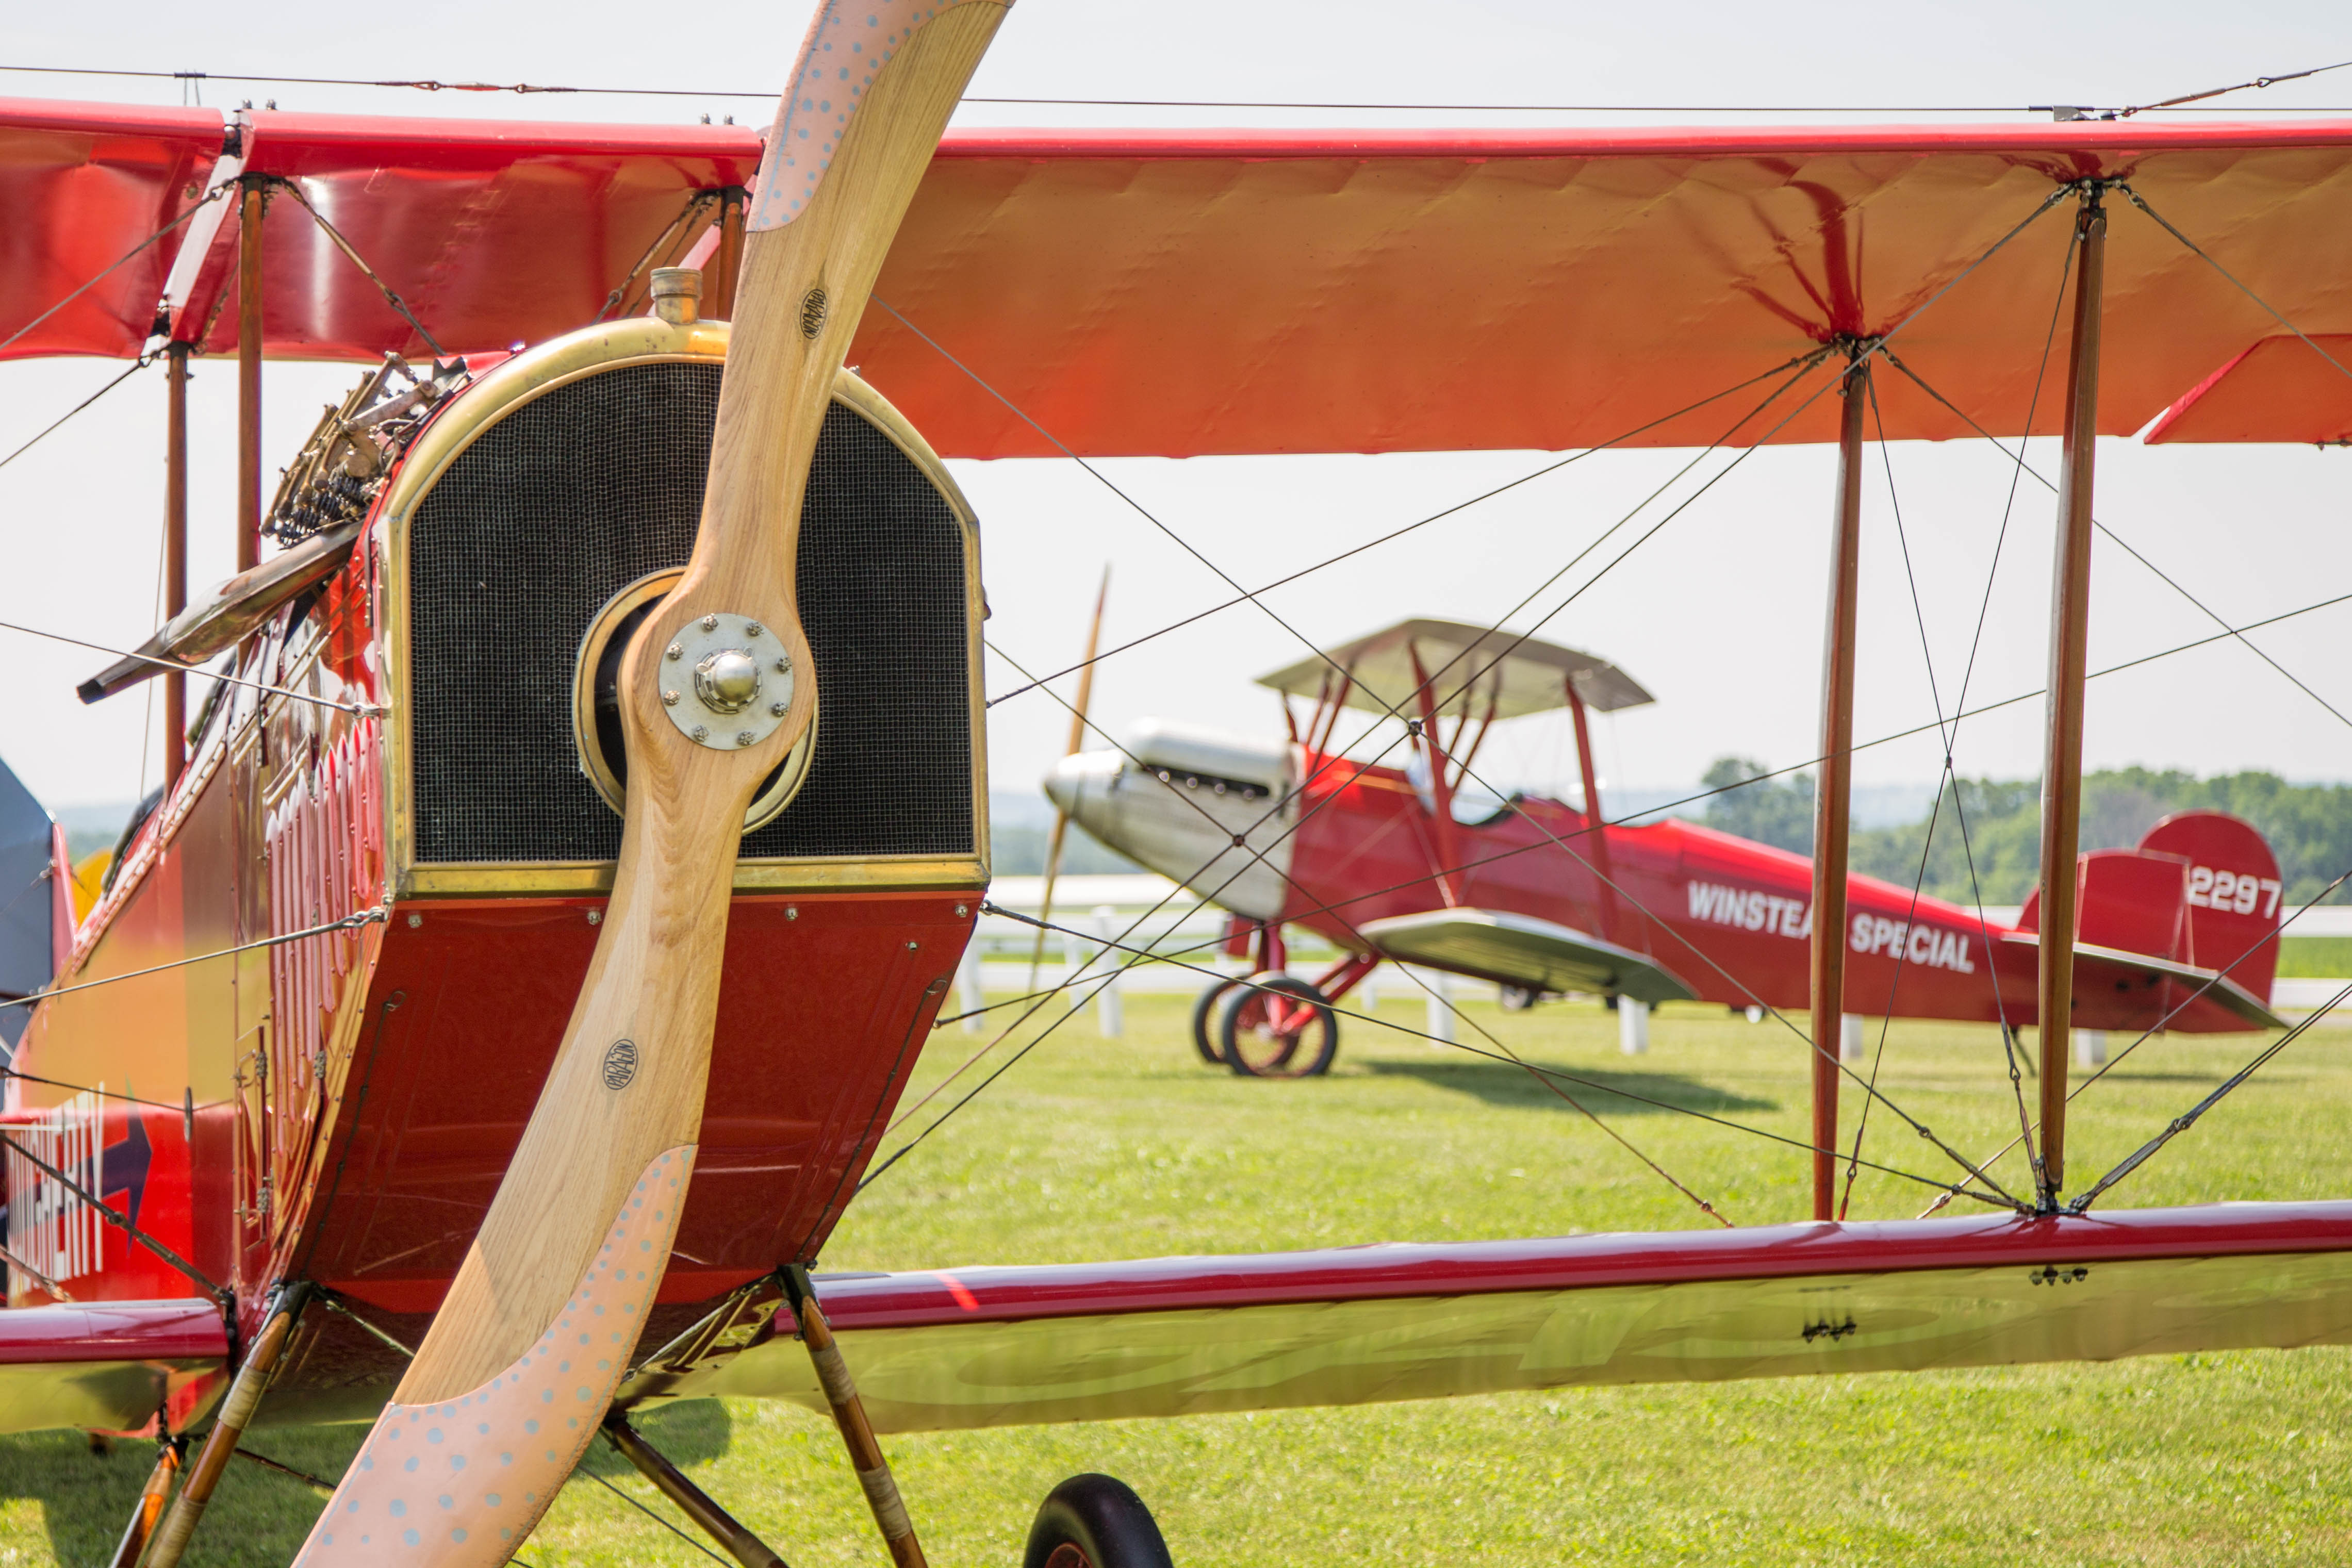 The Golden Age Air Museum’s Flying Circus Airshow is a step back in time